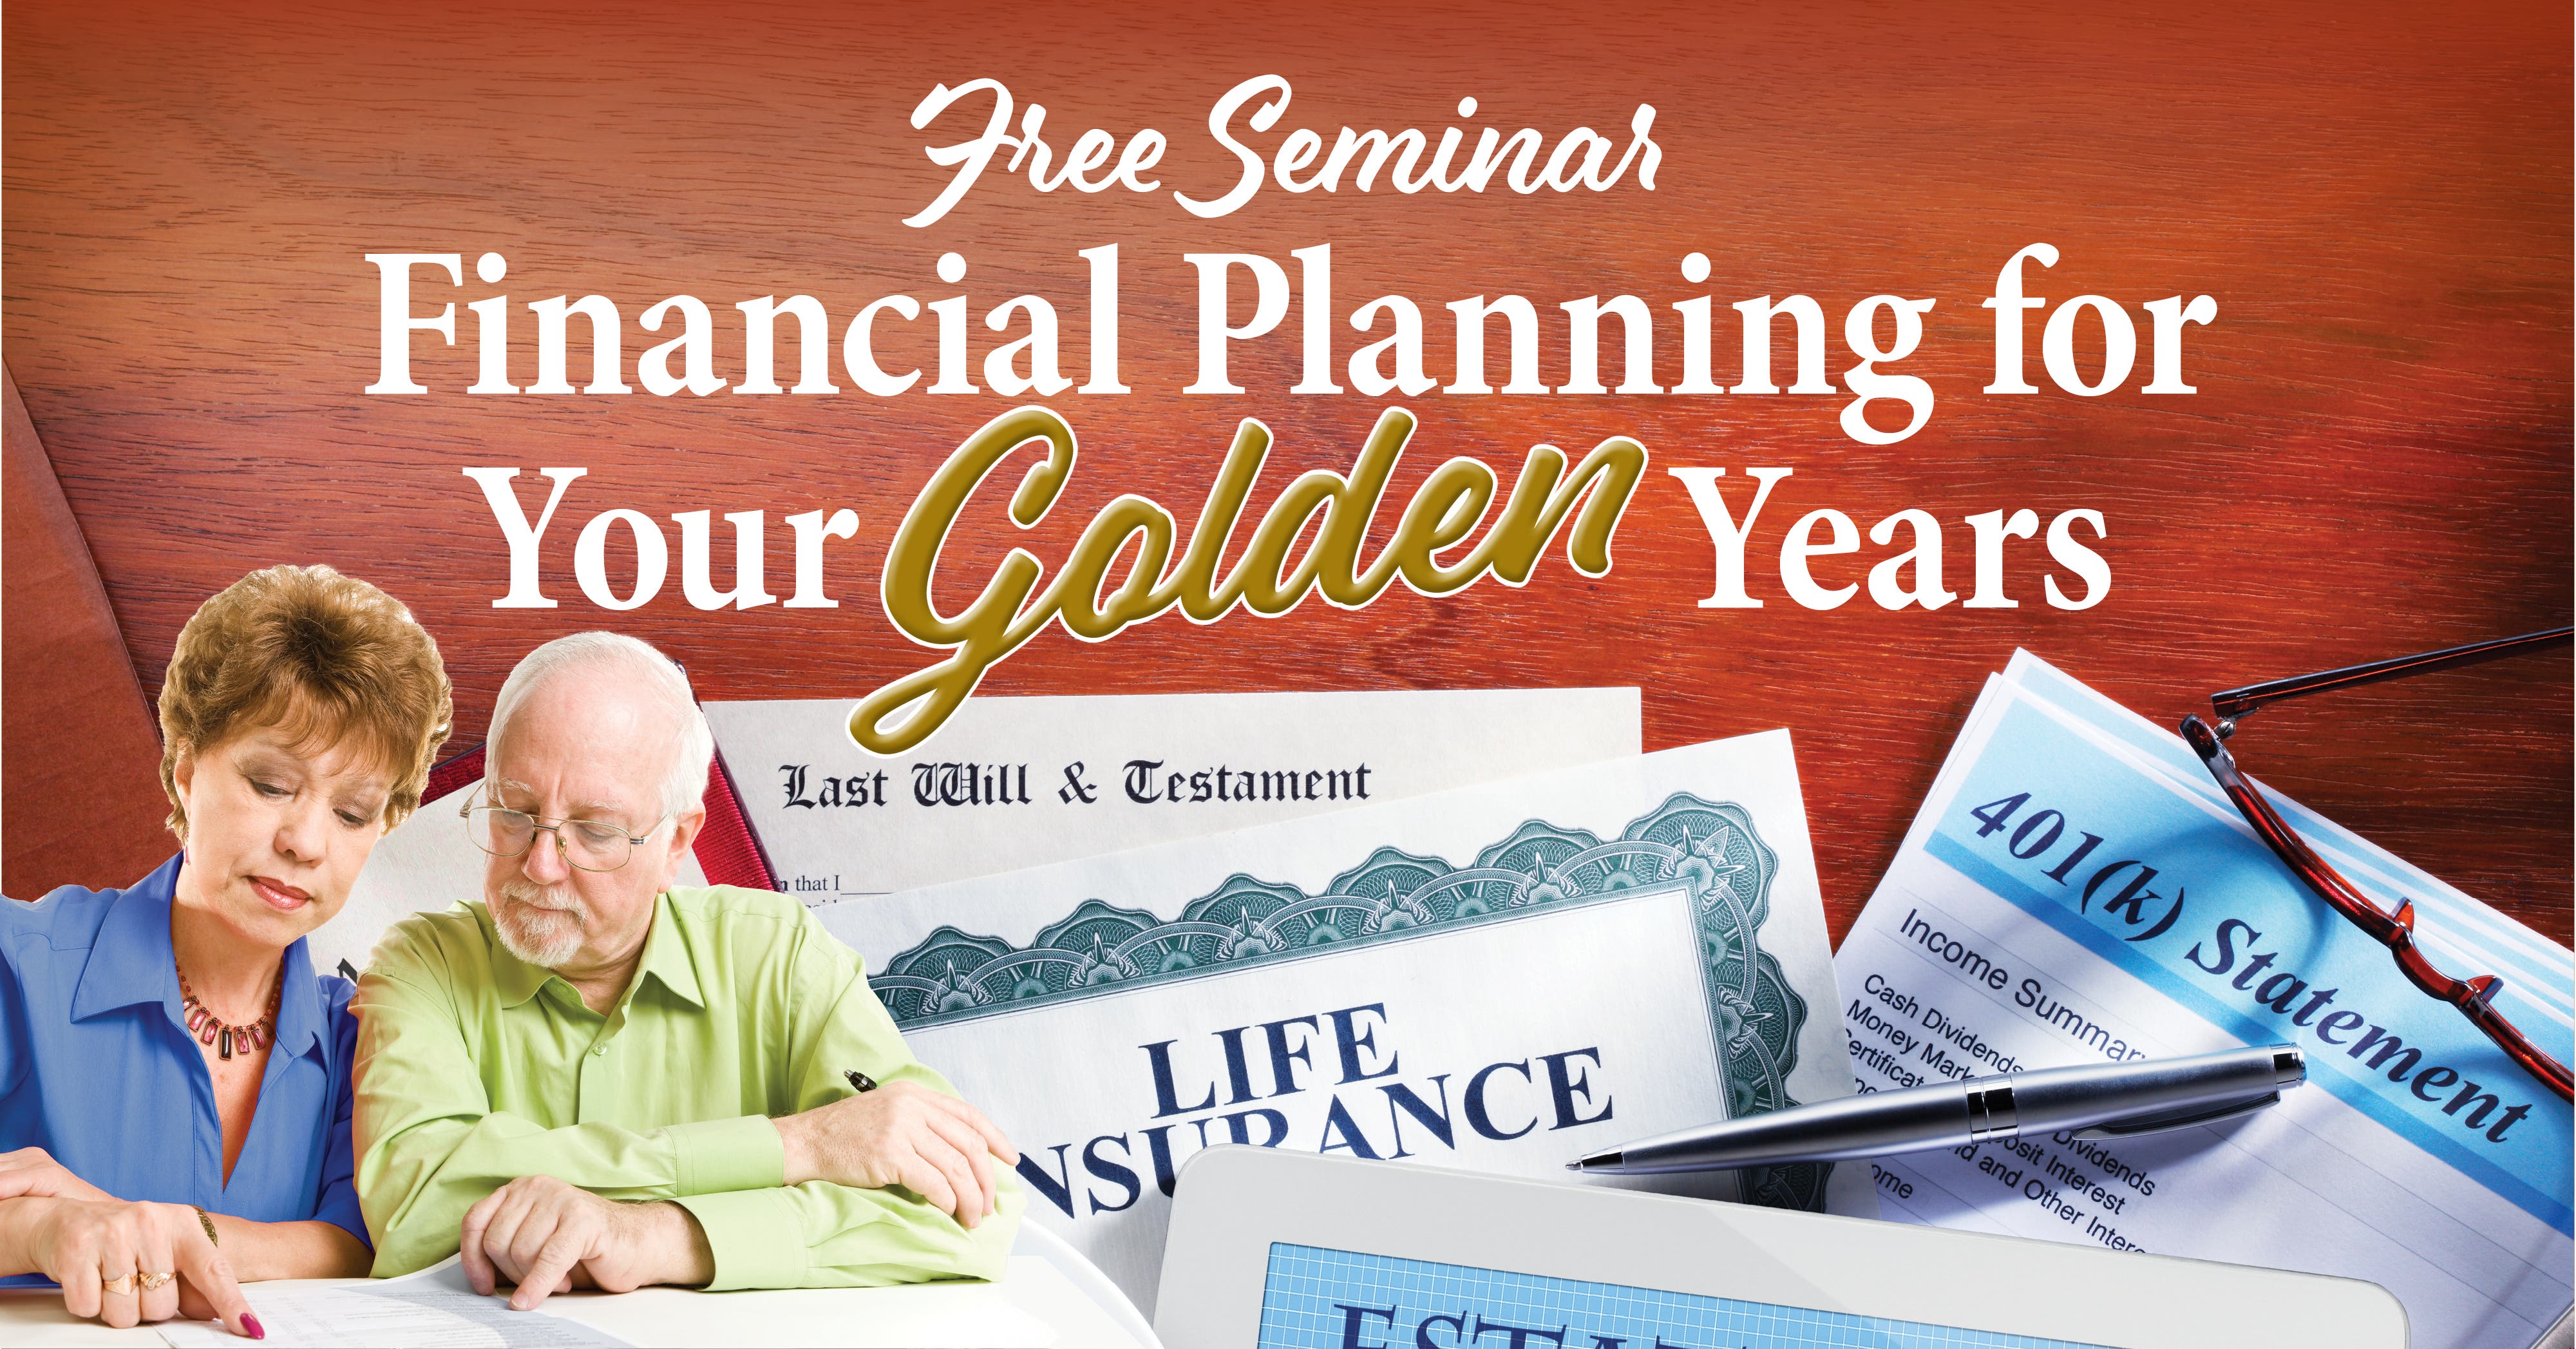 Financial planning for your golden years